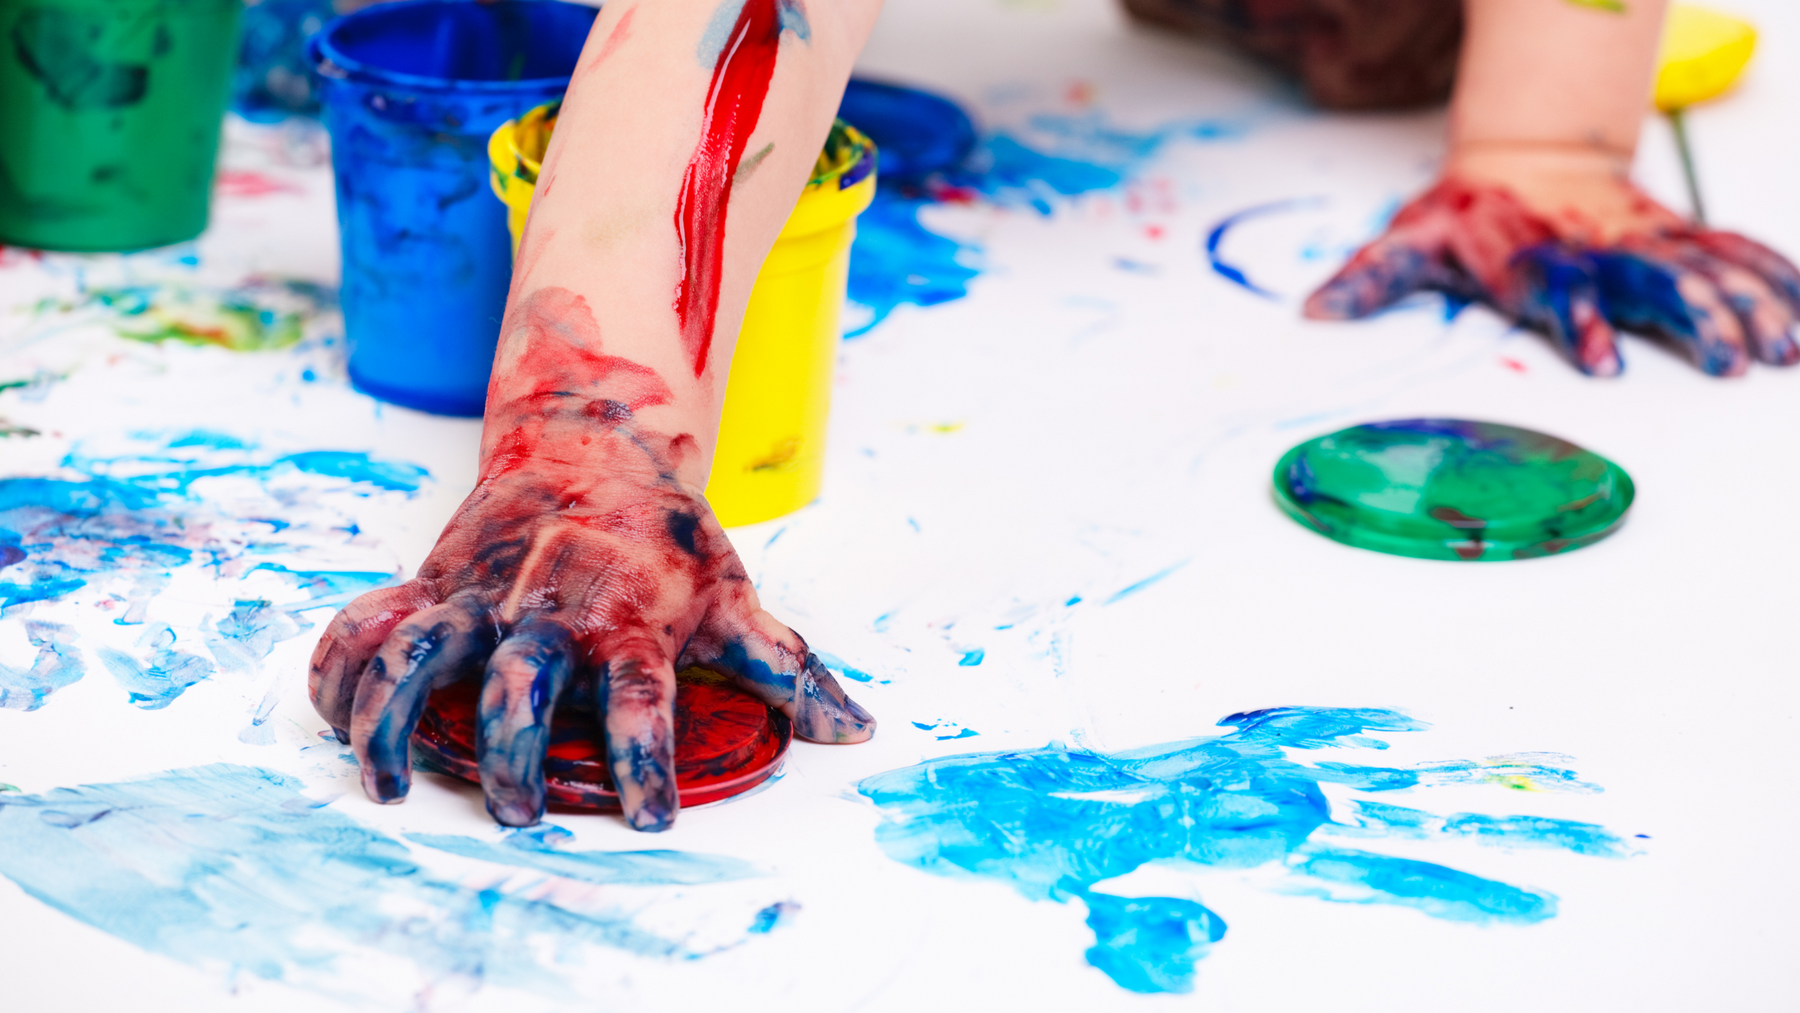 Top Tips To Clean Up Messy Play Activities At Home